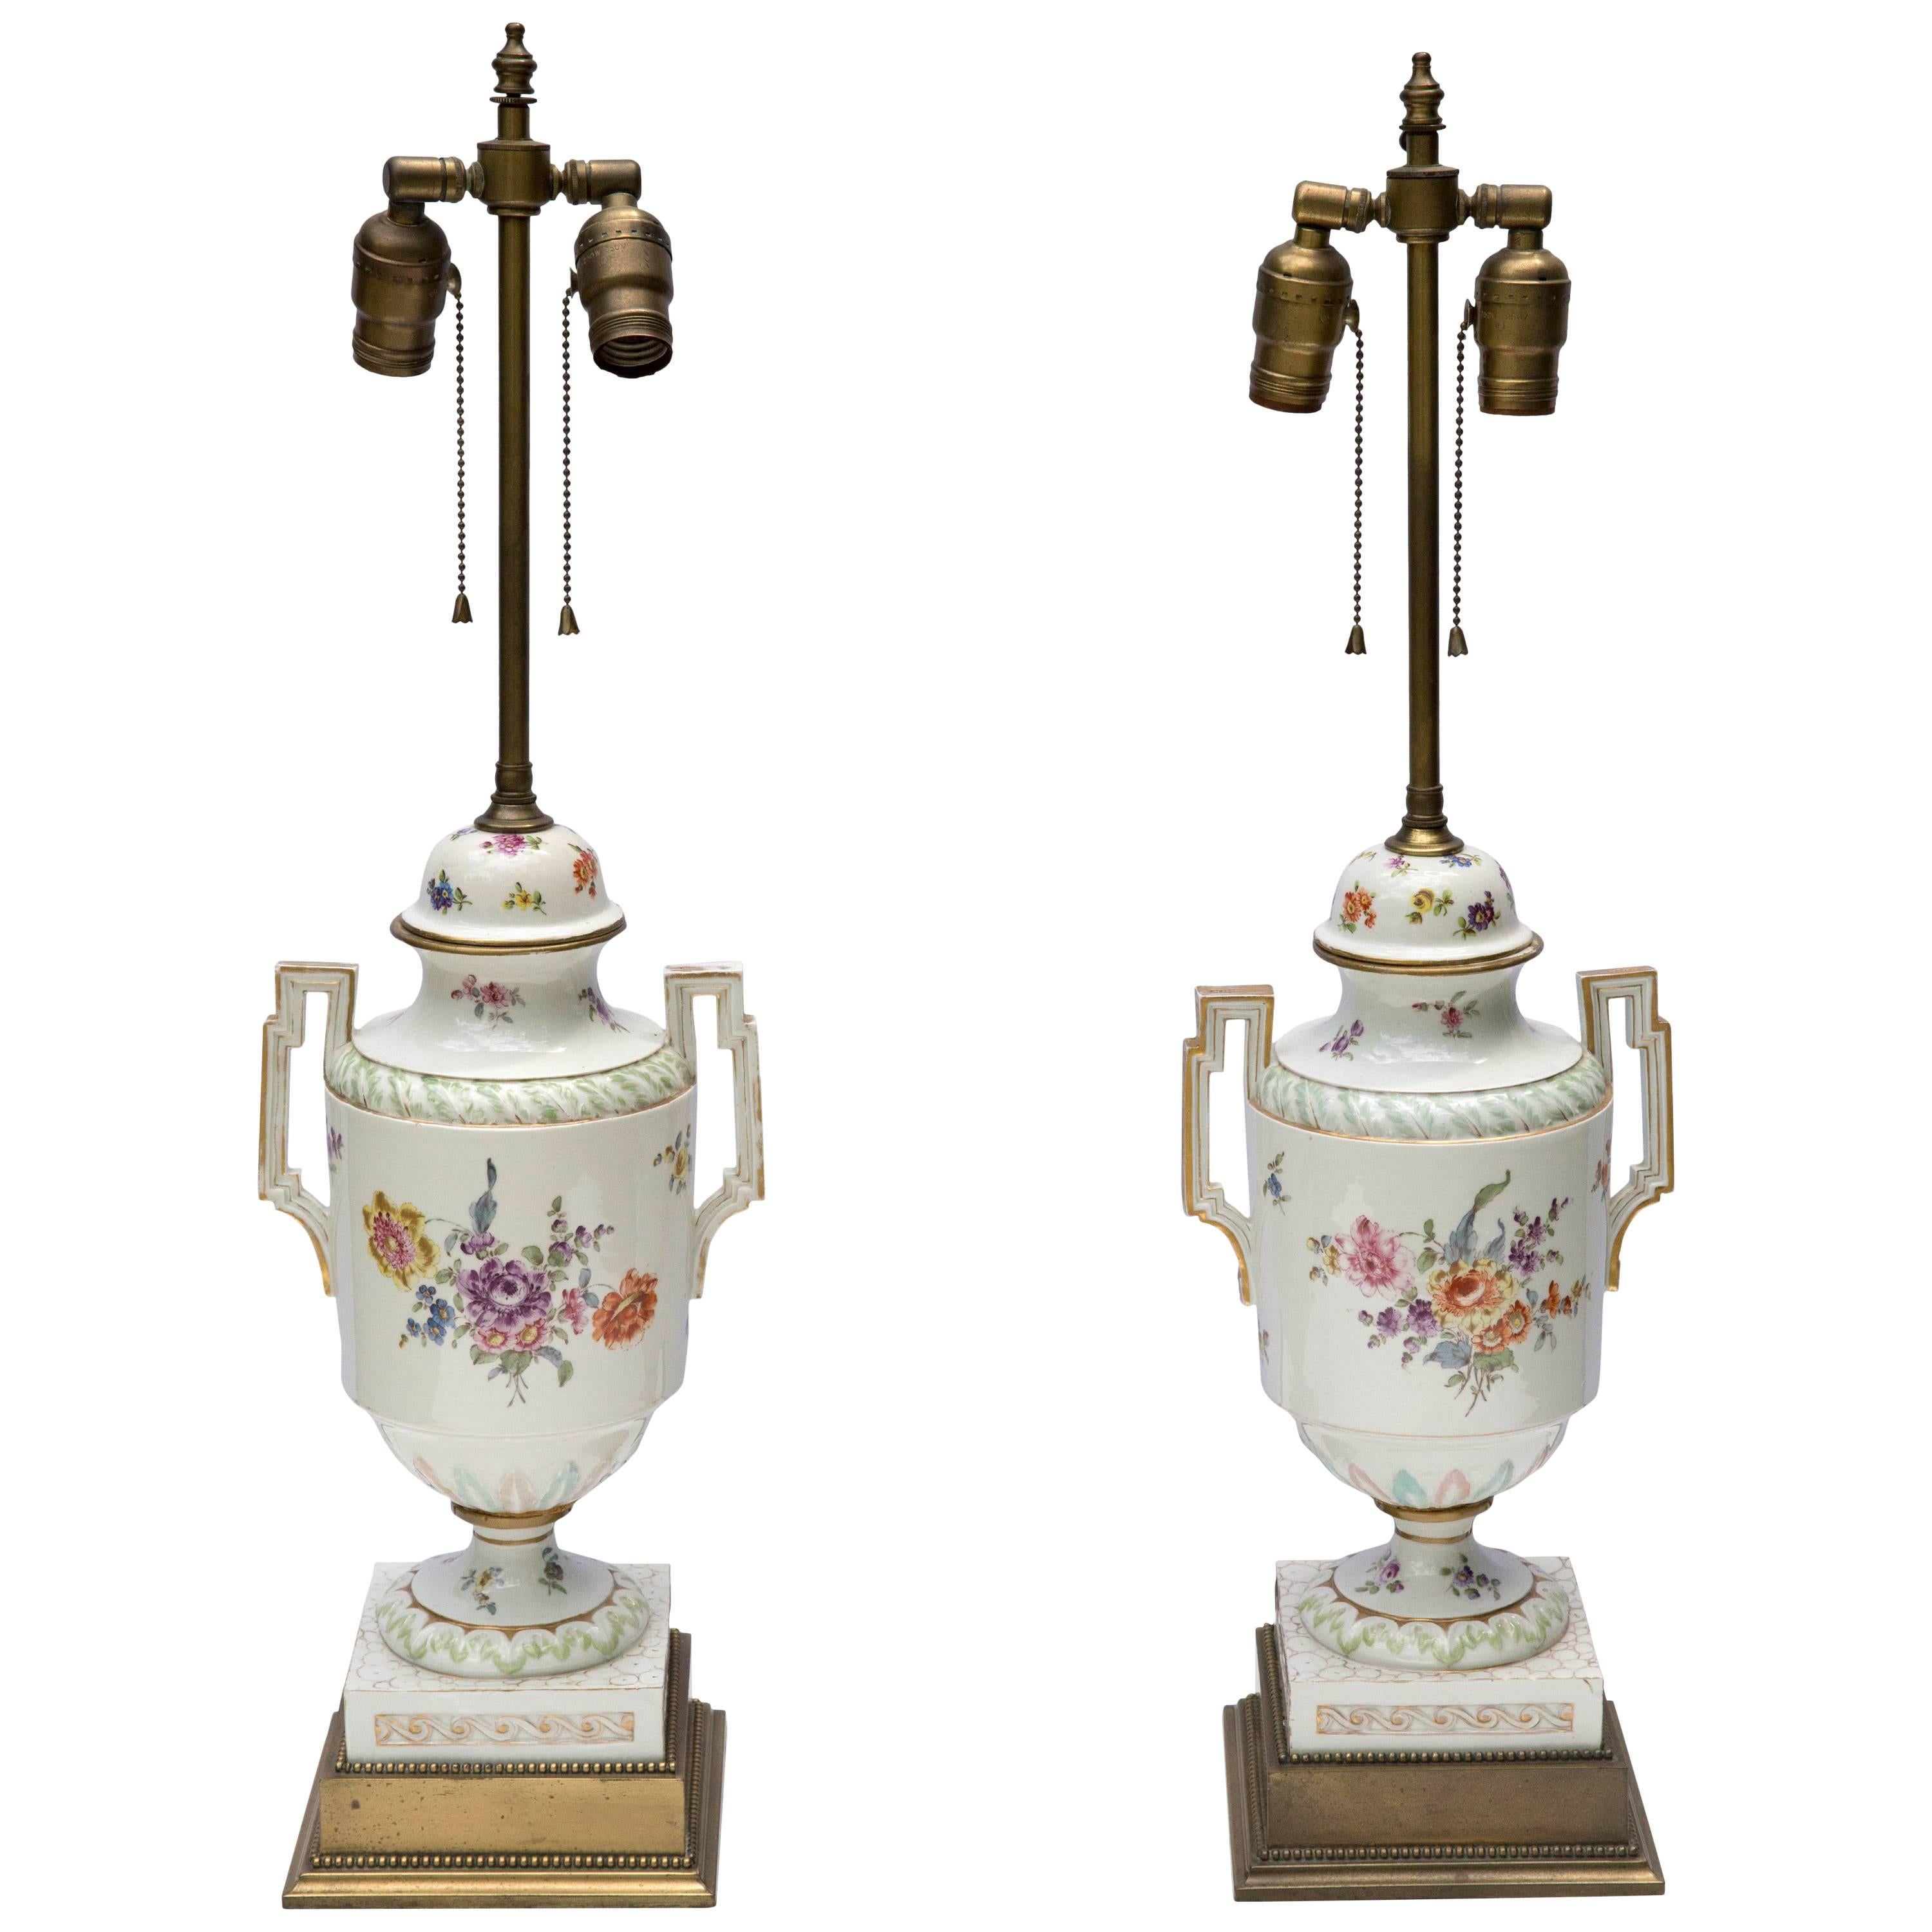 Pair of Neoclassical French Porcelain Urns as Table Lamps